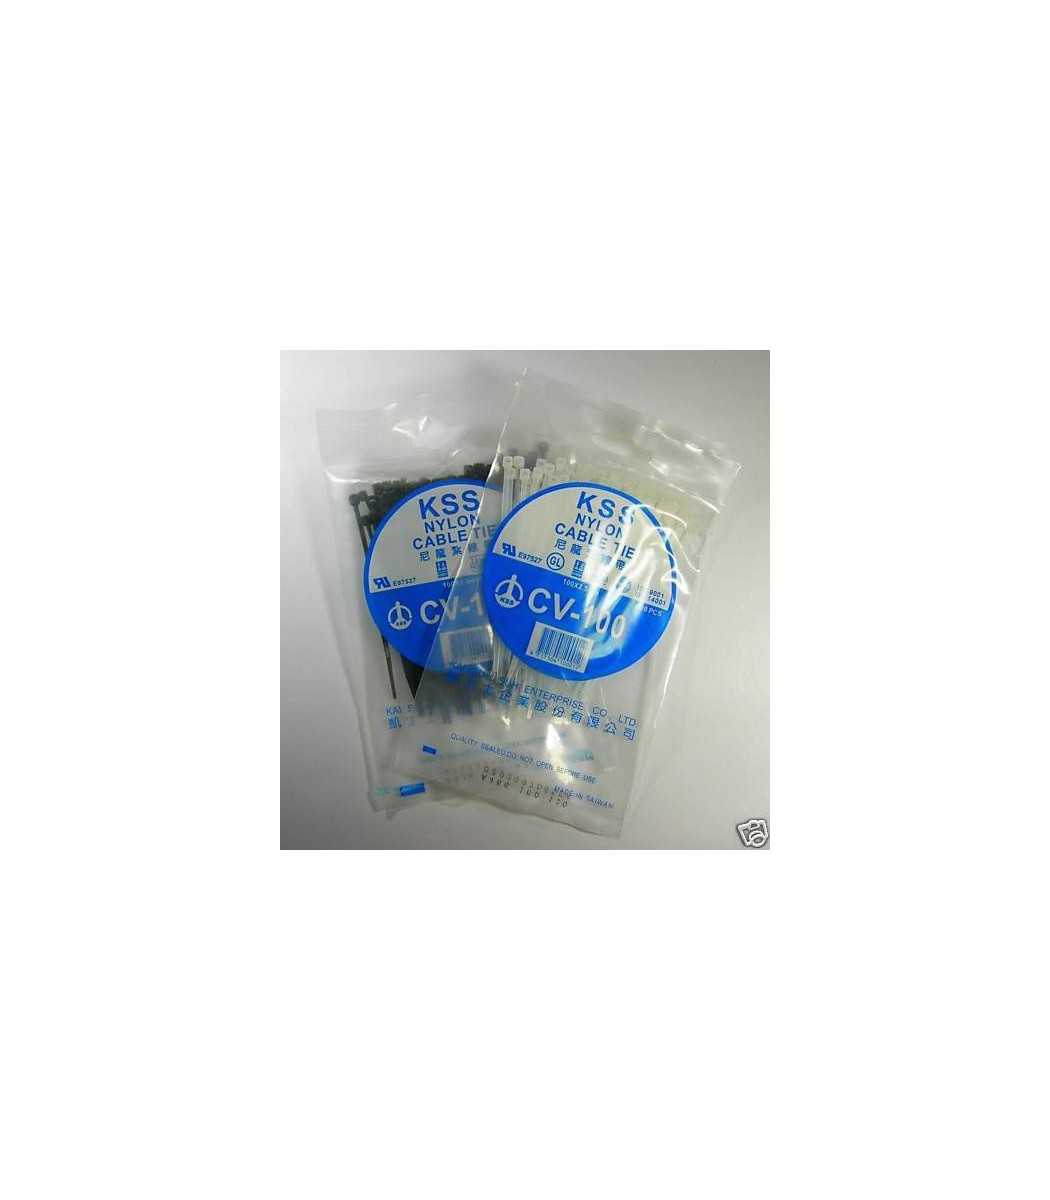 Plastic Wire Zip Cable Ties, 100 x 2.5mm, 100 Pcs